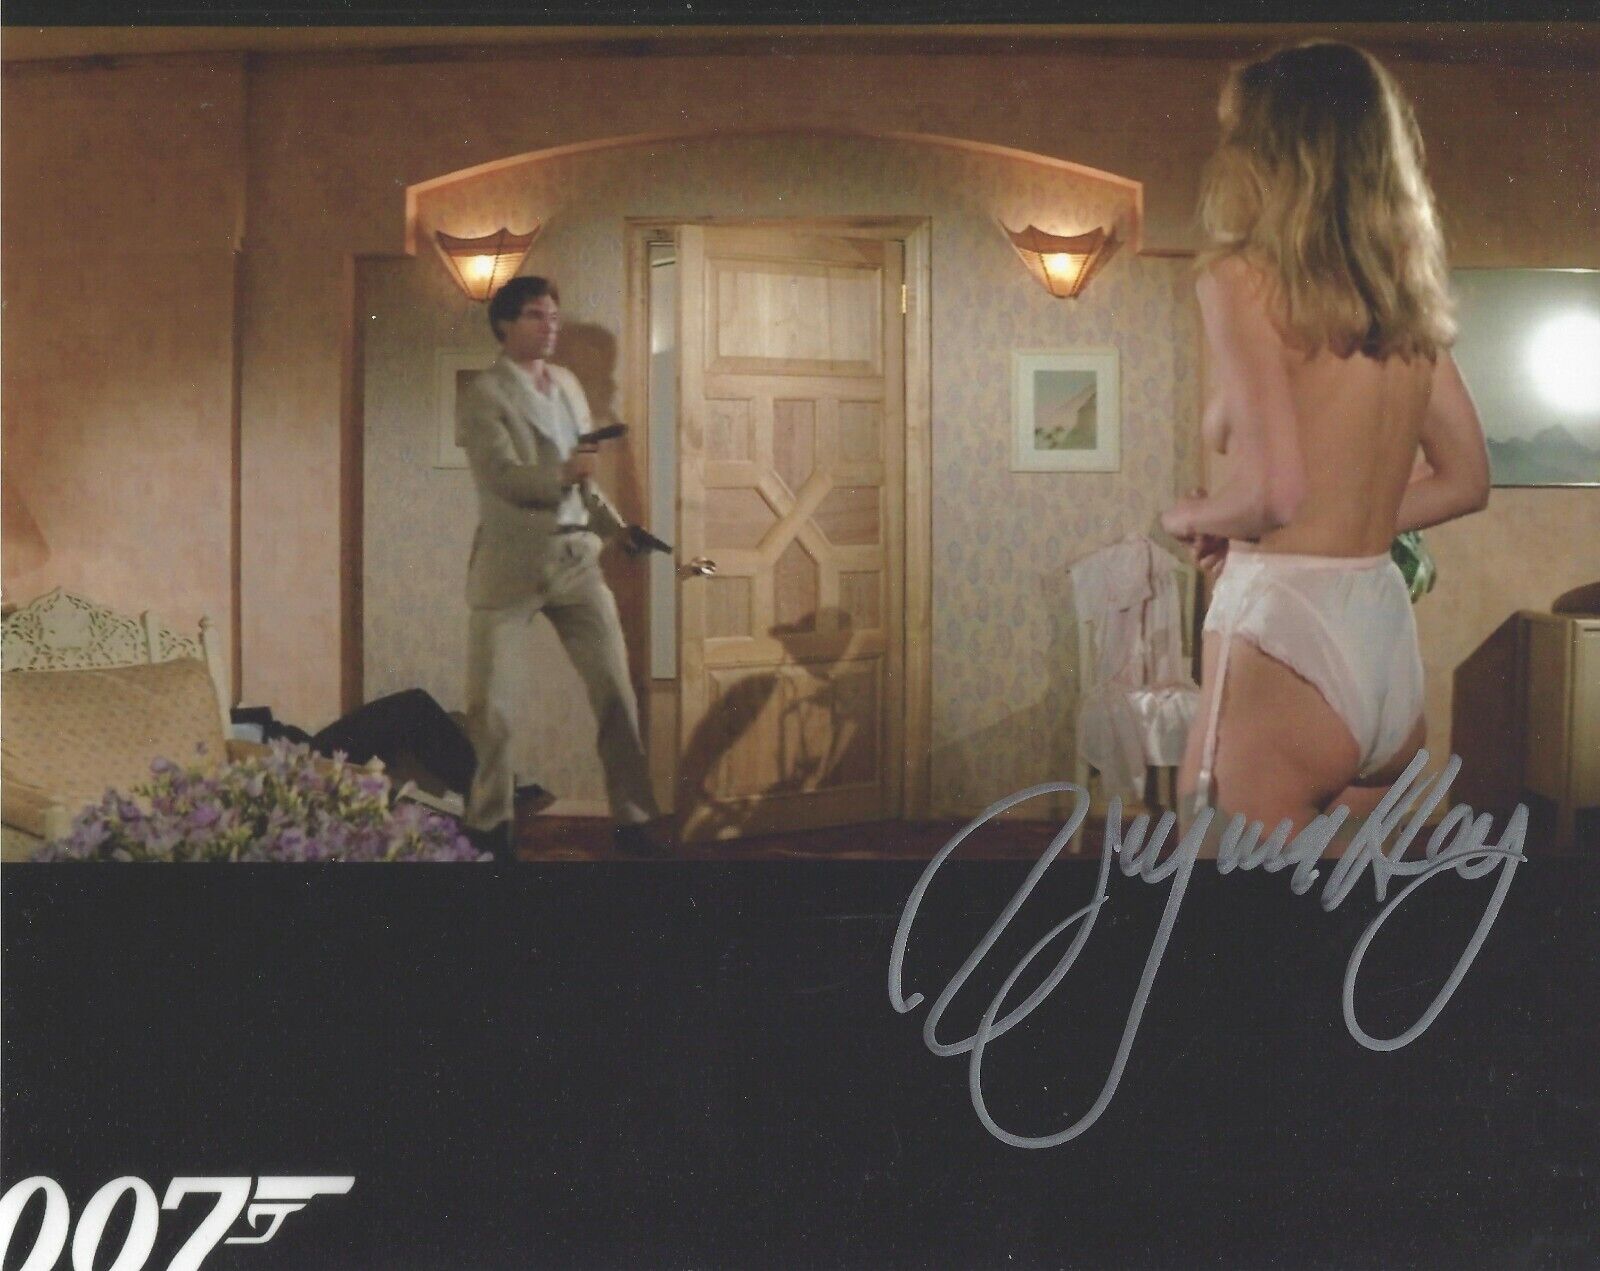 VIRGINIA HEY SIGNED 007 JAMES BOND 8x10 Photo Poster painting 1 - UACC & AFTAL RD AUTOGRAPH